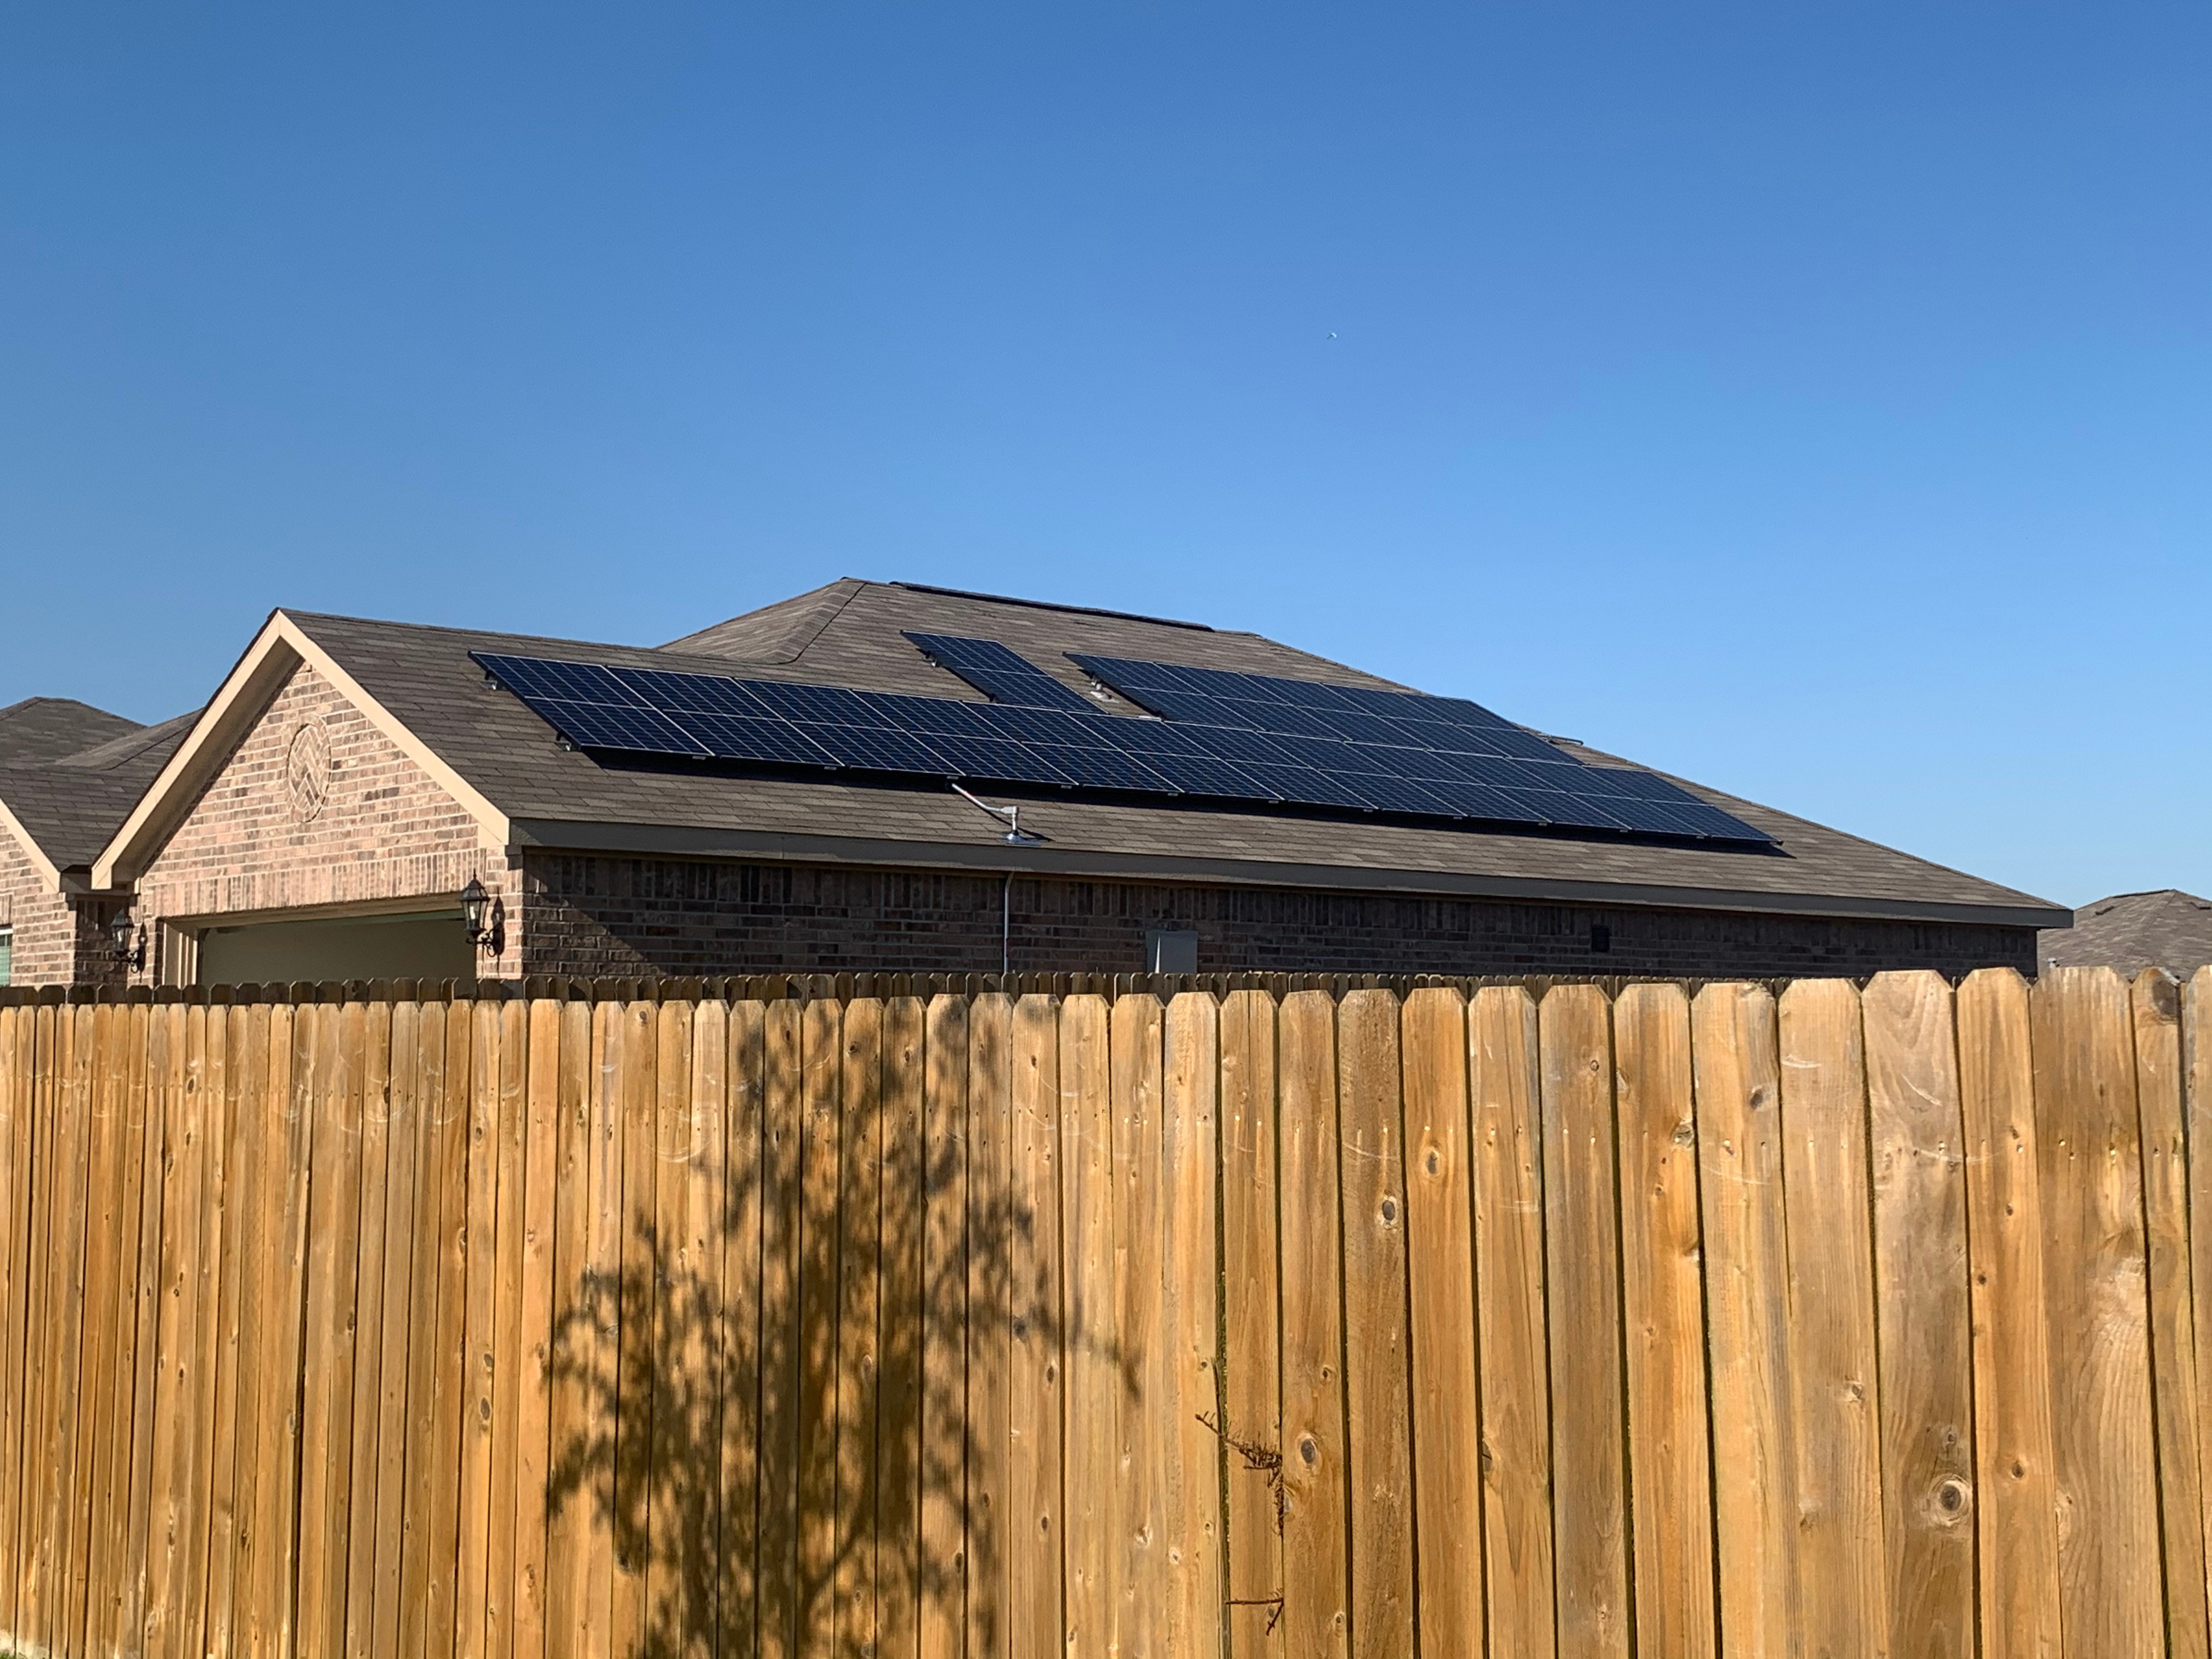 solar panels on roof with fence